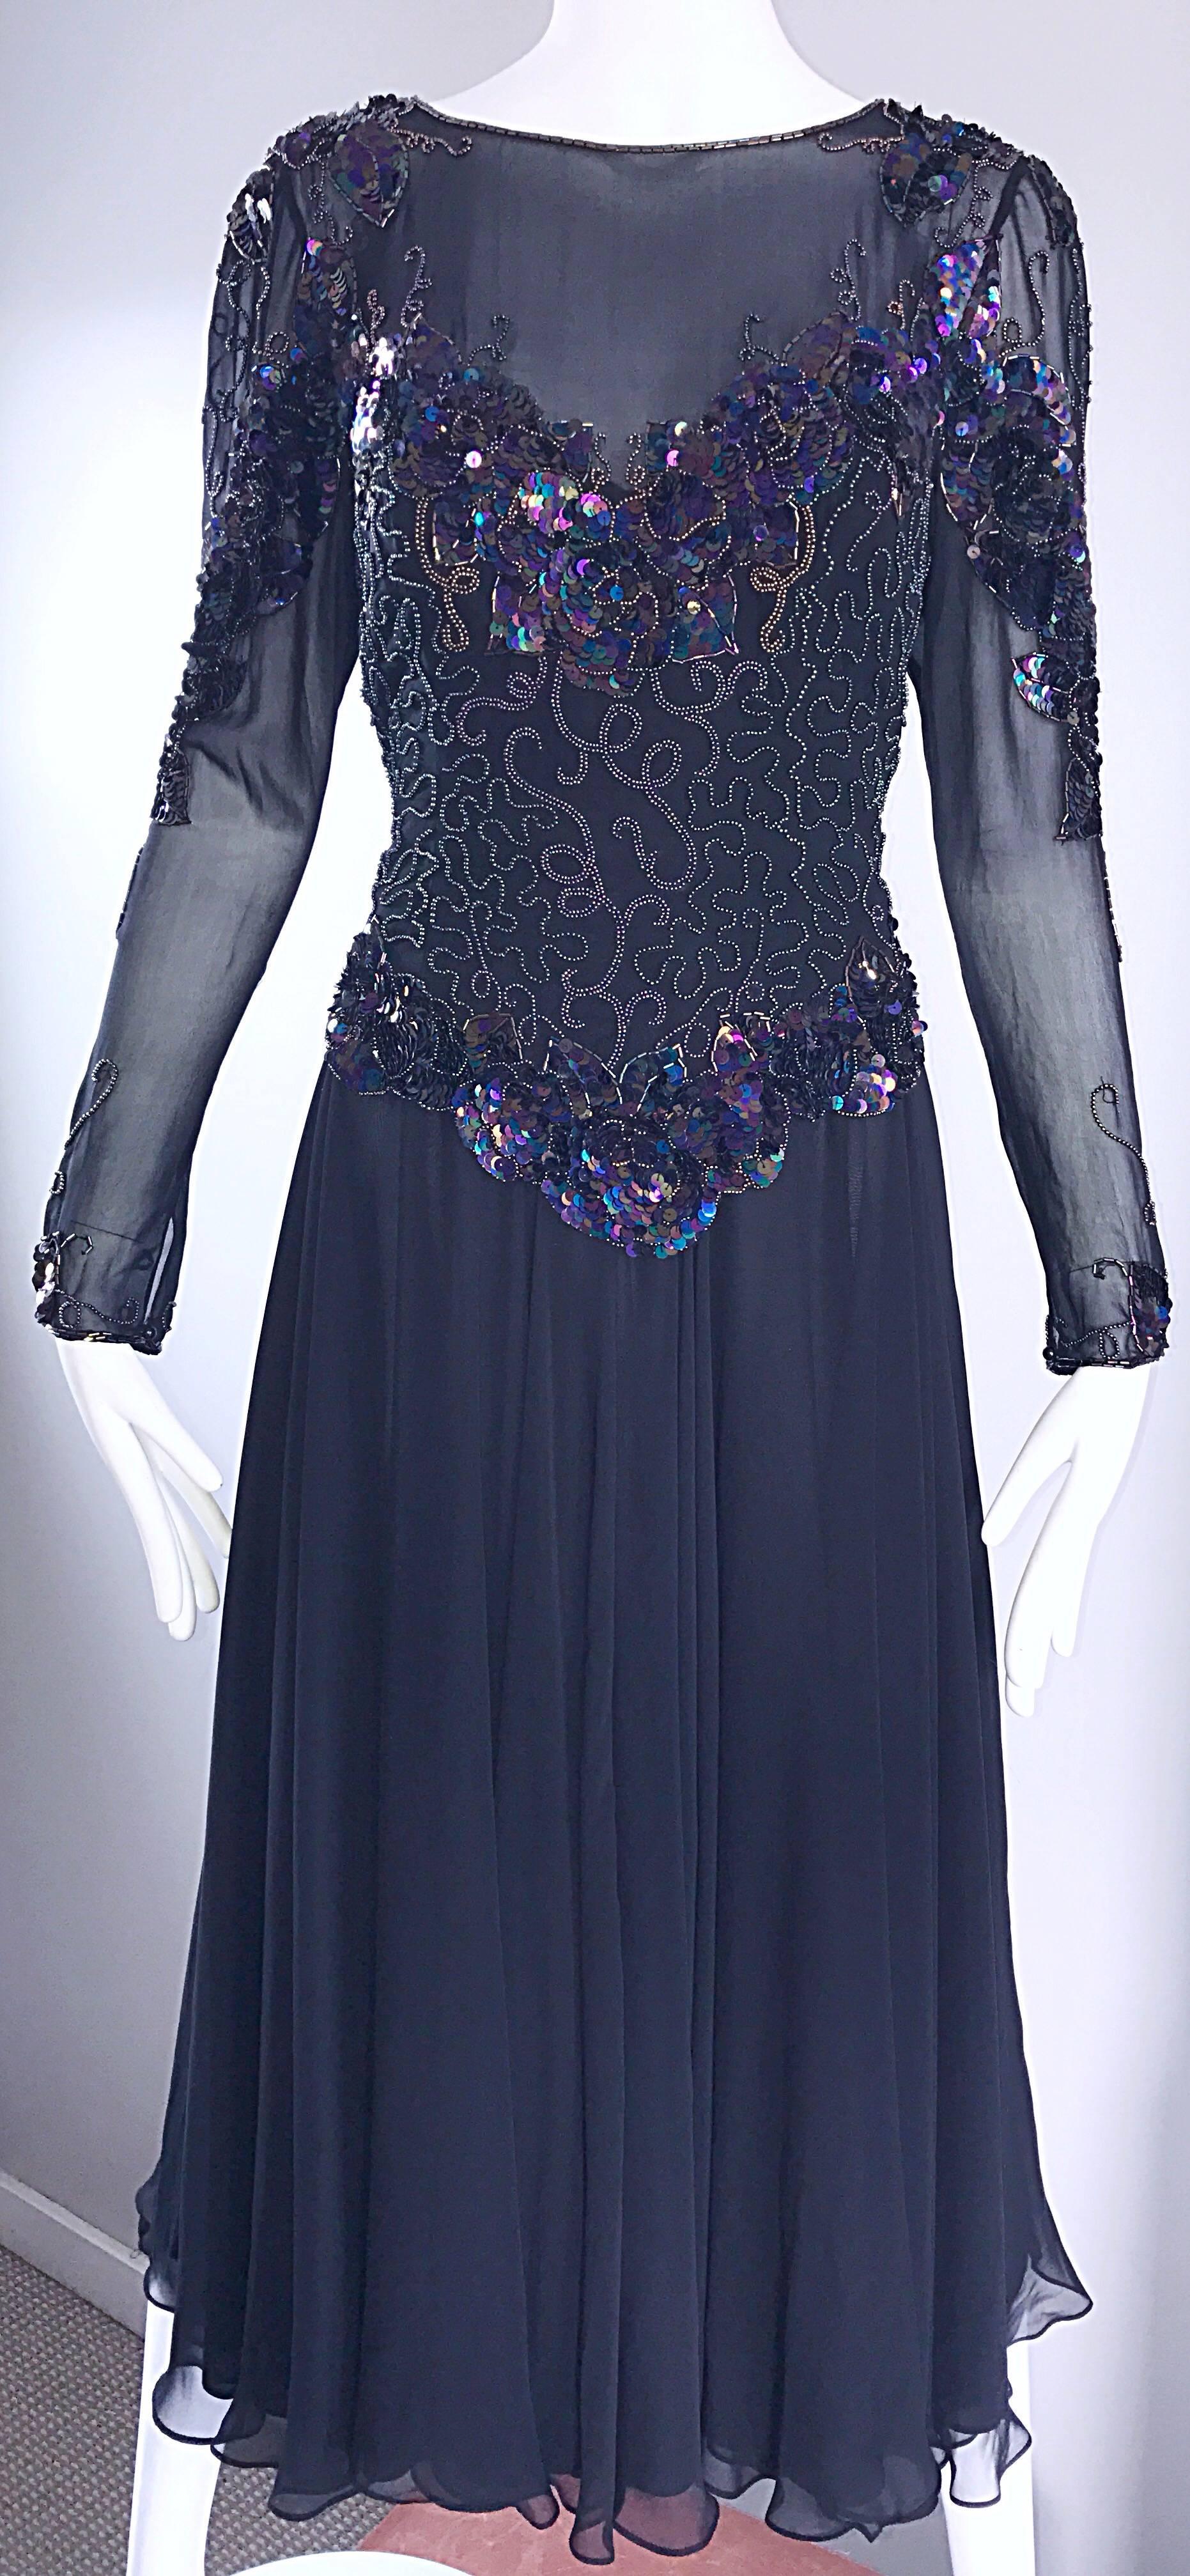  Vintage Eletra Casadei 1980s Black Sequined Beaded Silk Chiffon 80s Midi Dress In Excellent Condition For Sale In San Diego, CA